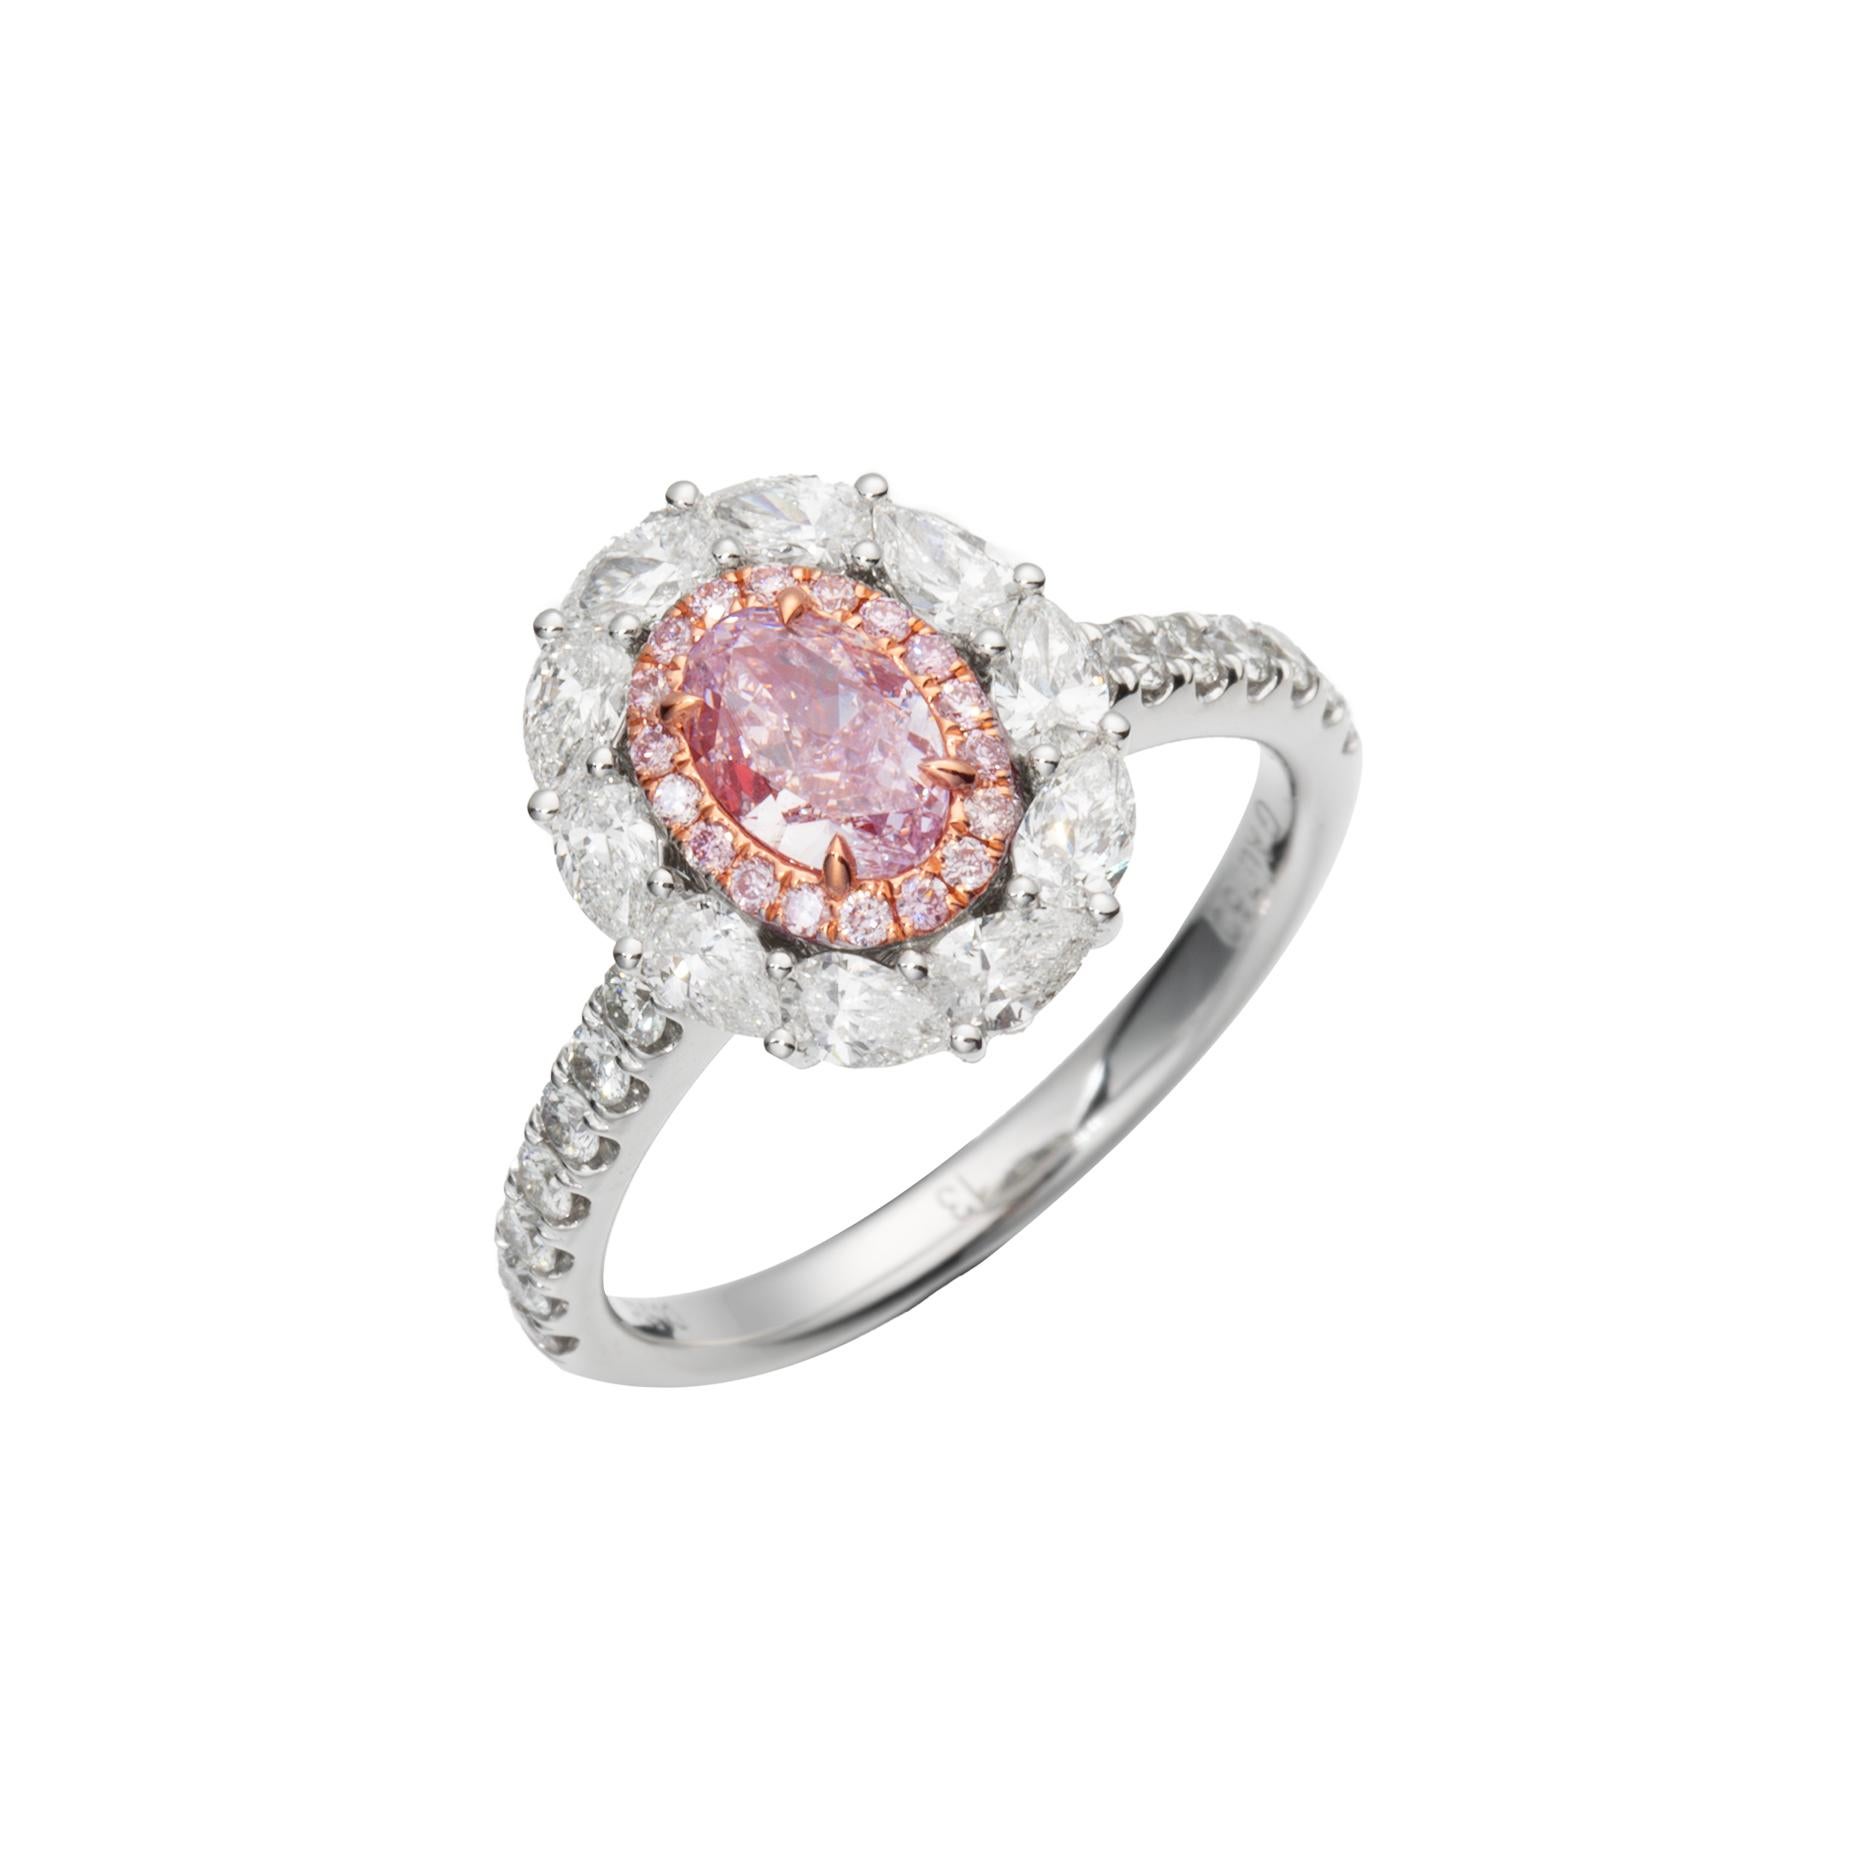 Introducing the epitome of elegance and rare beauty: the GIA Certified 0.51ct Natural Fancy Light Purplish Pink Oval Shape Diamond Ring on 18kt Gold. This exquisite piece is a testament to timeless luxury, meticulously crafted to capture hearts and